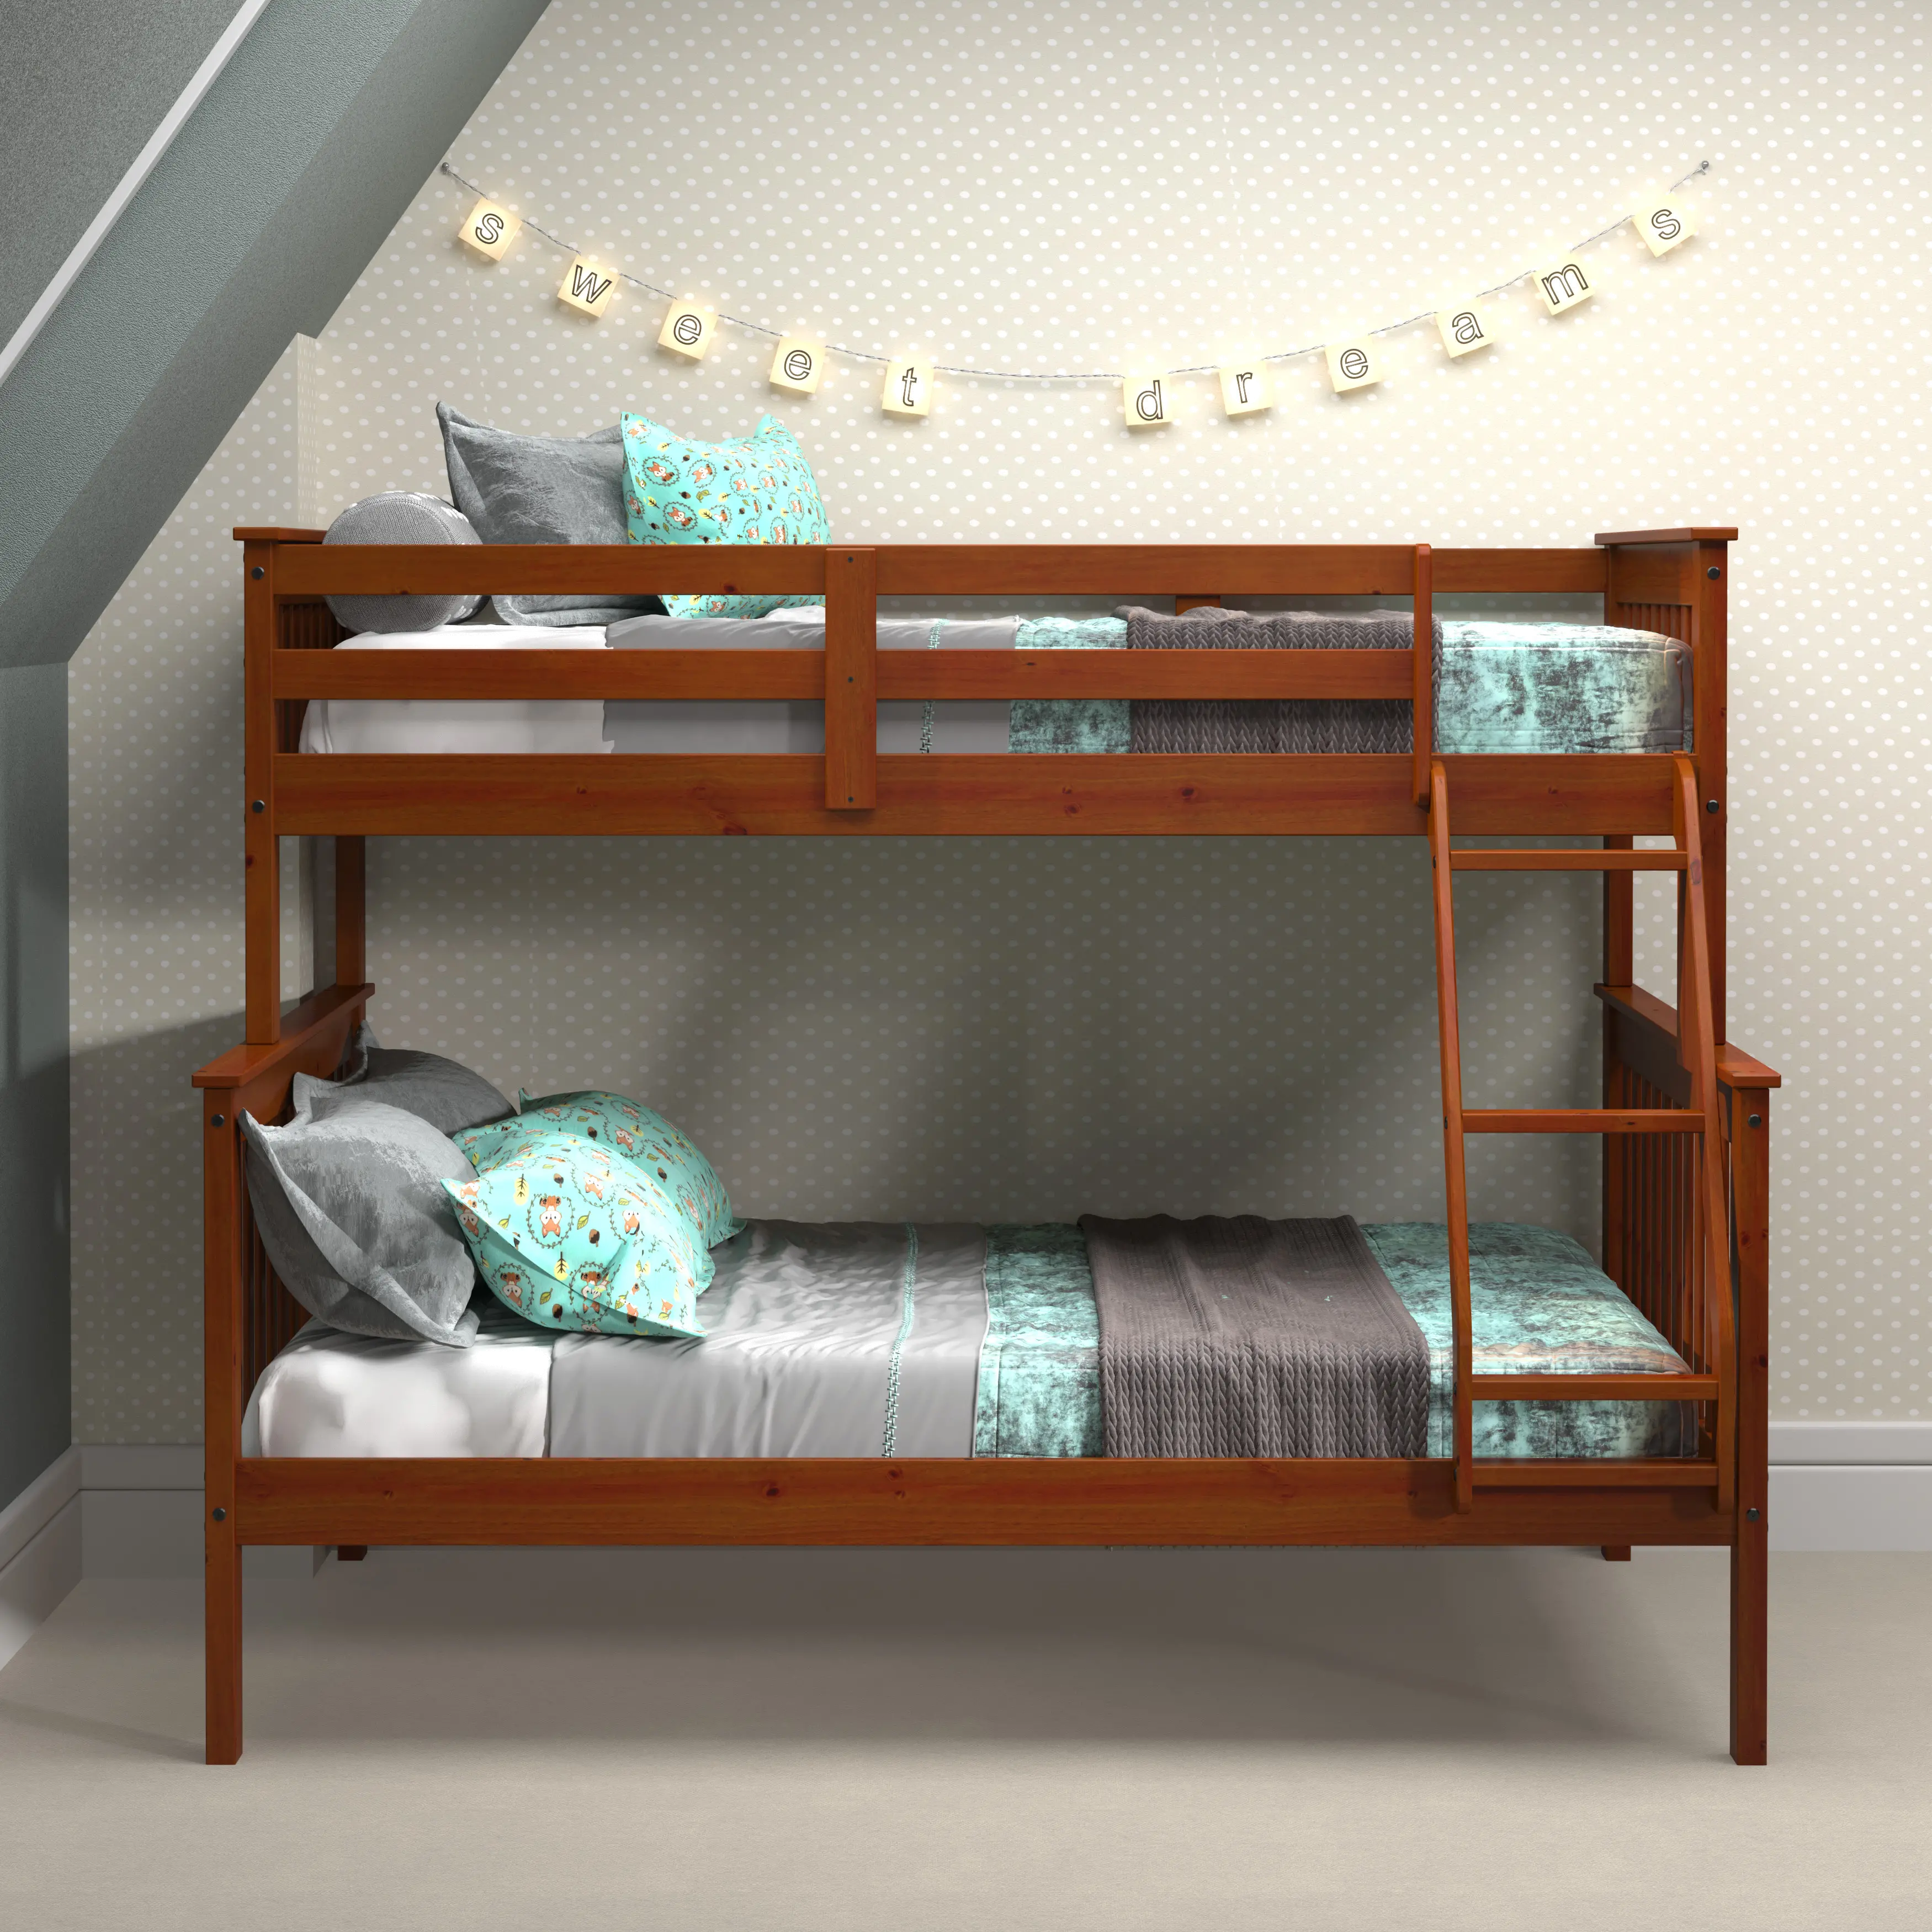 Espresso Brown Twin-over-Full Bunk Bed - Craftsman